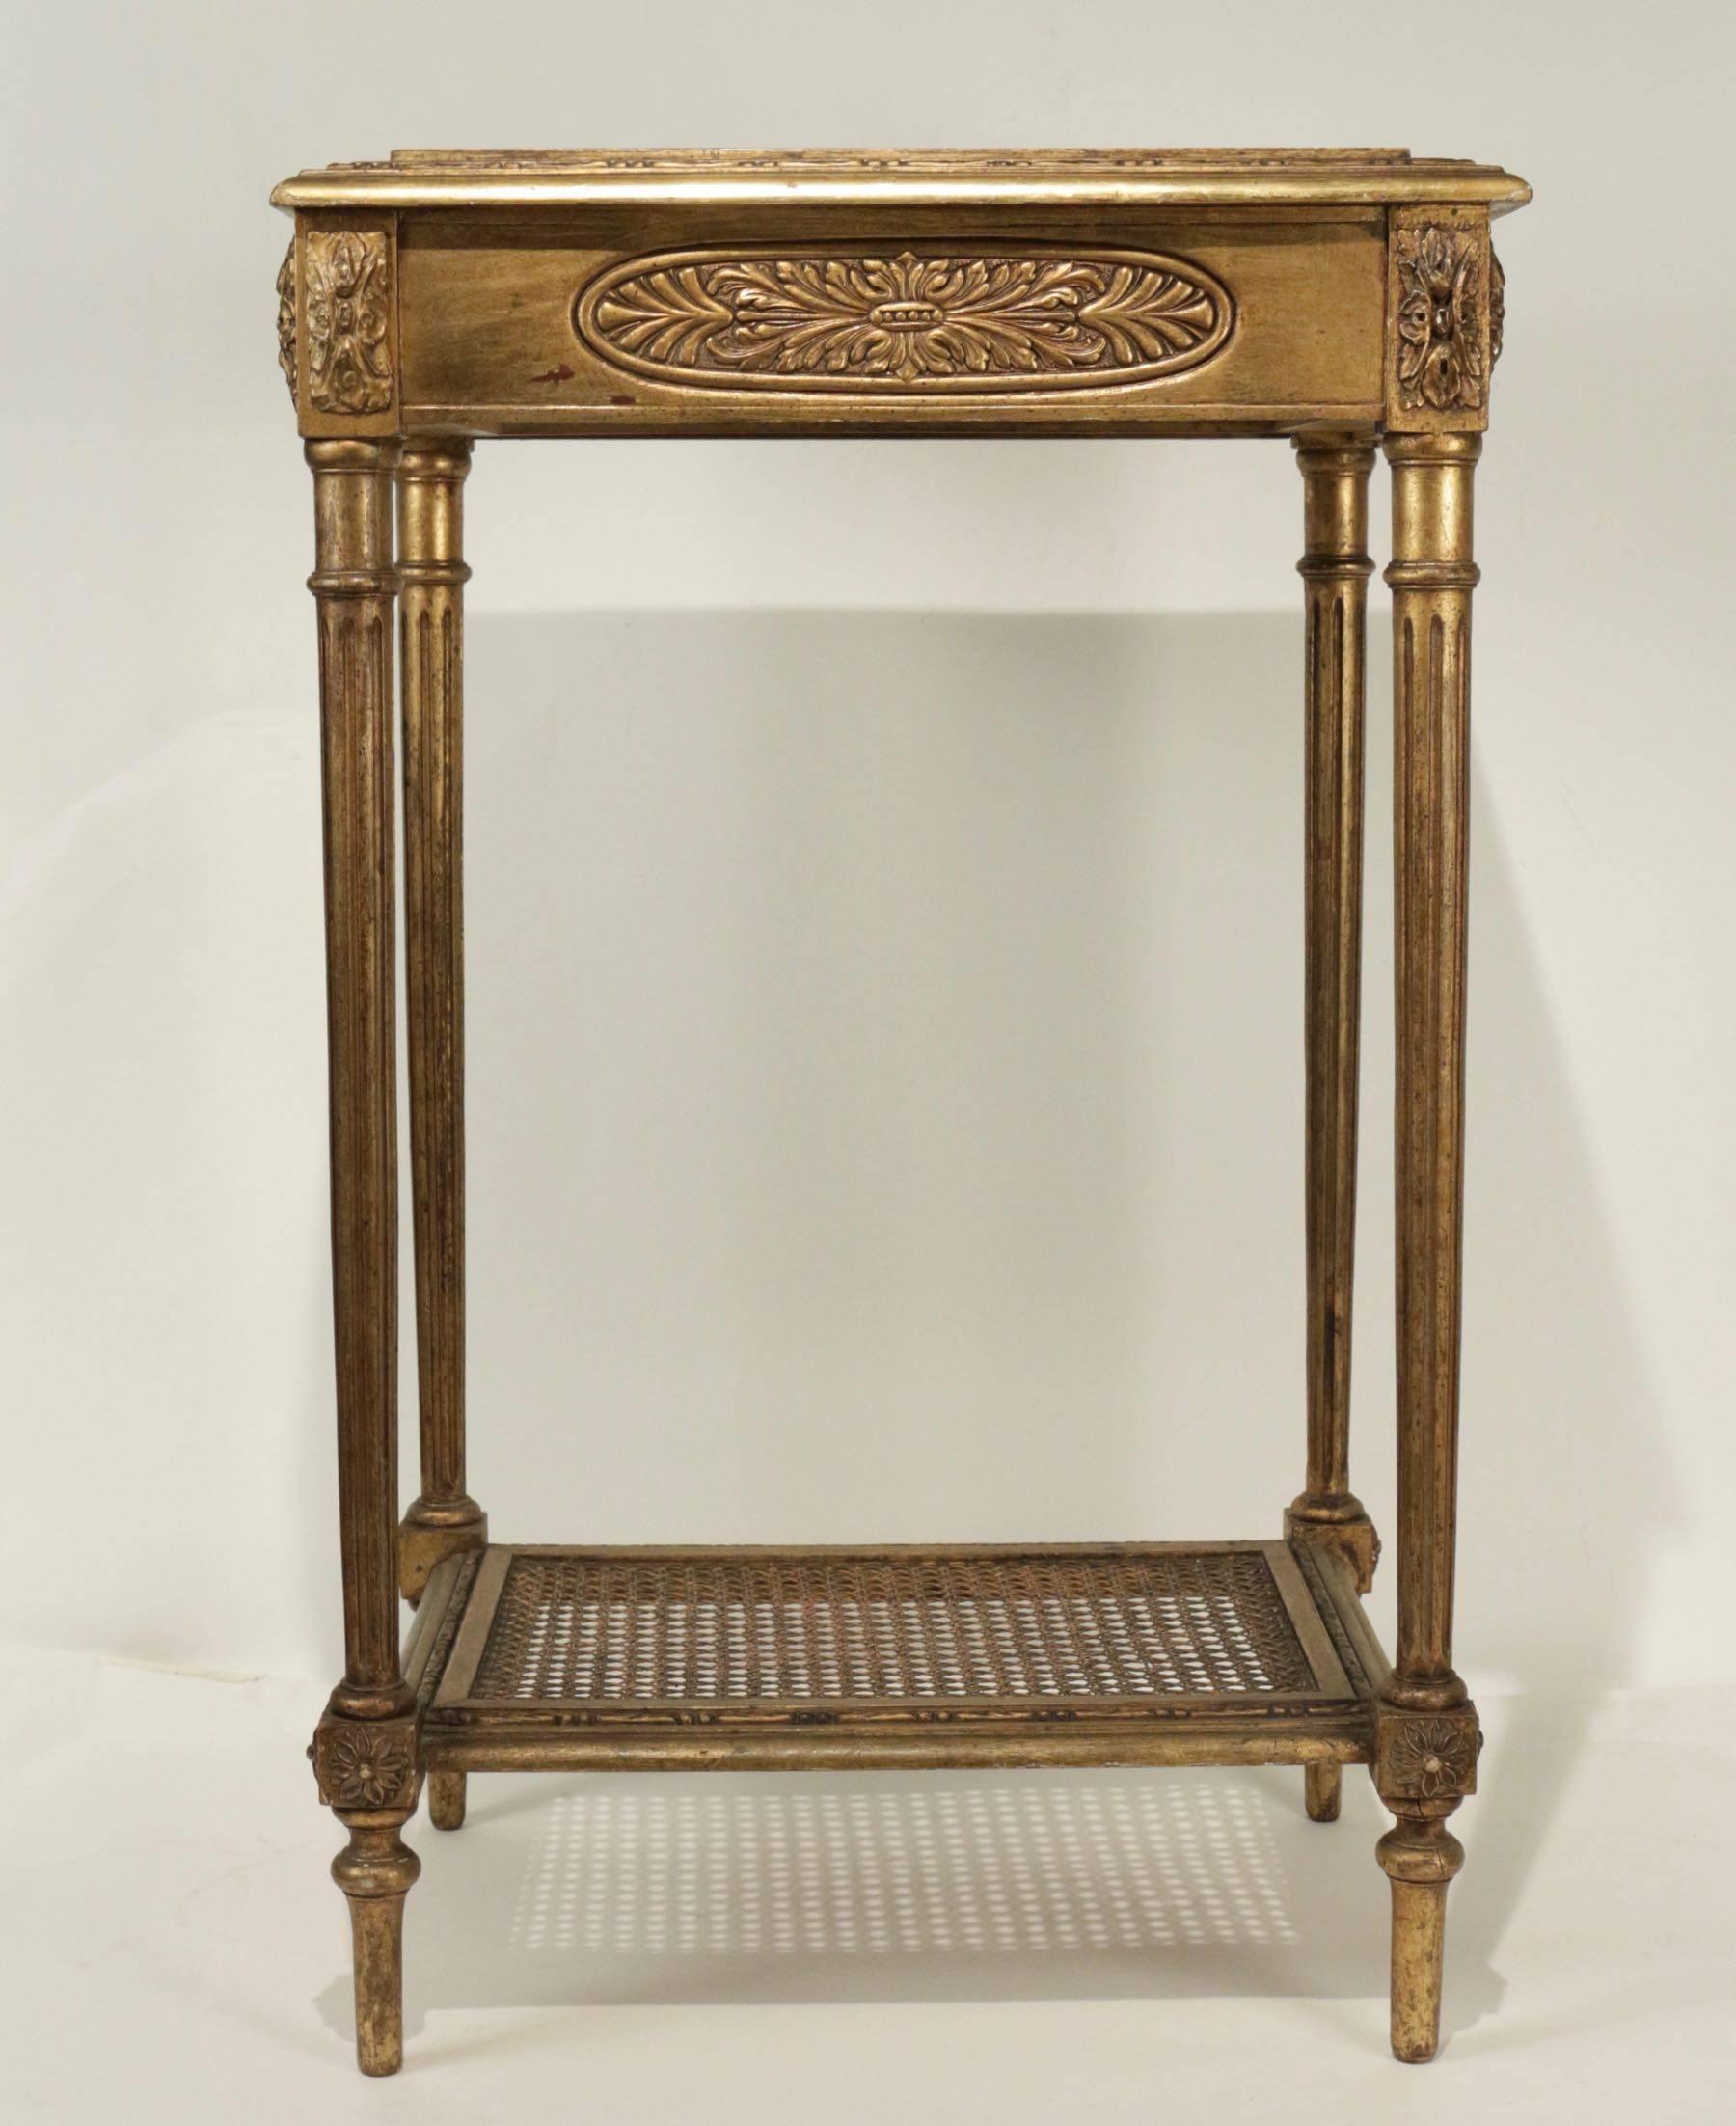 20th Century Elegant Console with a Centre Drawer in the Style of Louis XVI For Sale